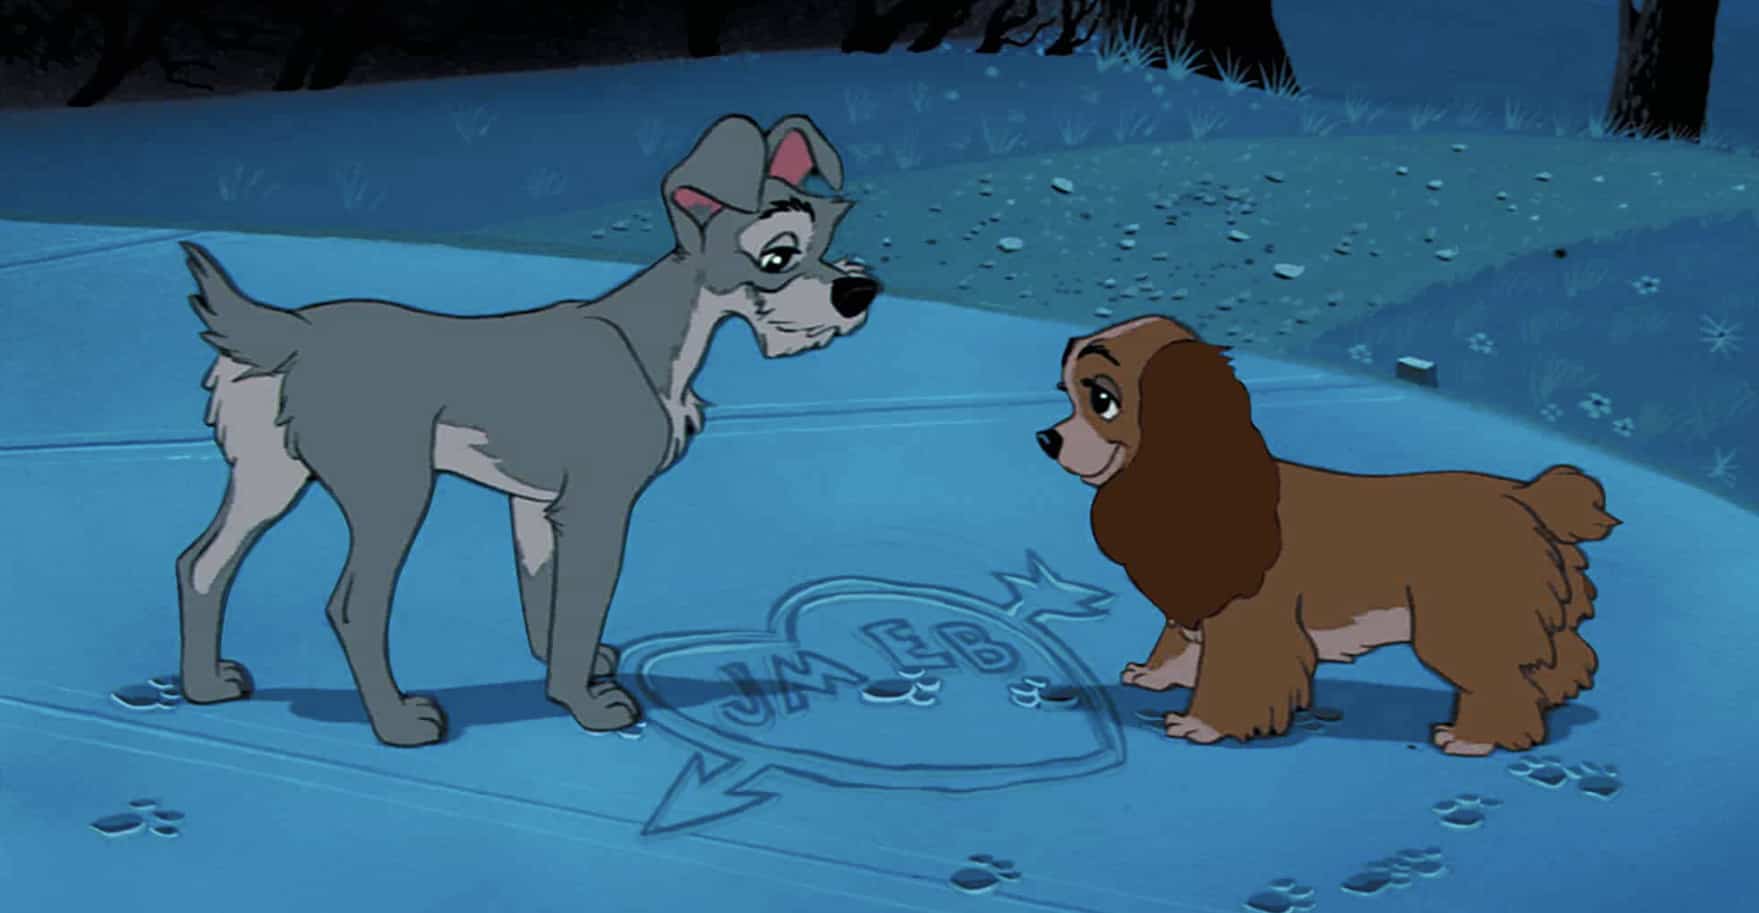 Two dogs stand opposite each other with a heart drawn in the snow between them in this image from Disney Plus.